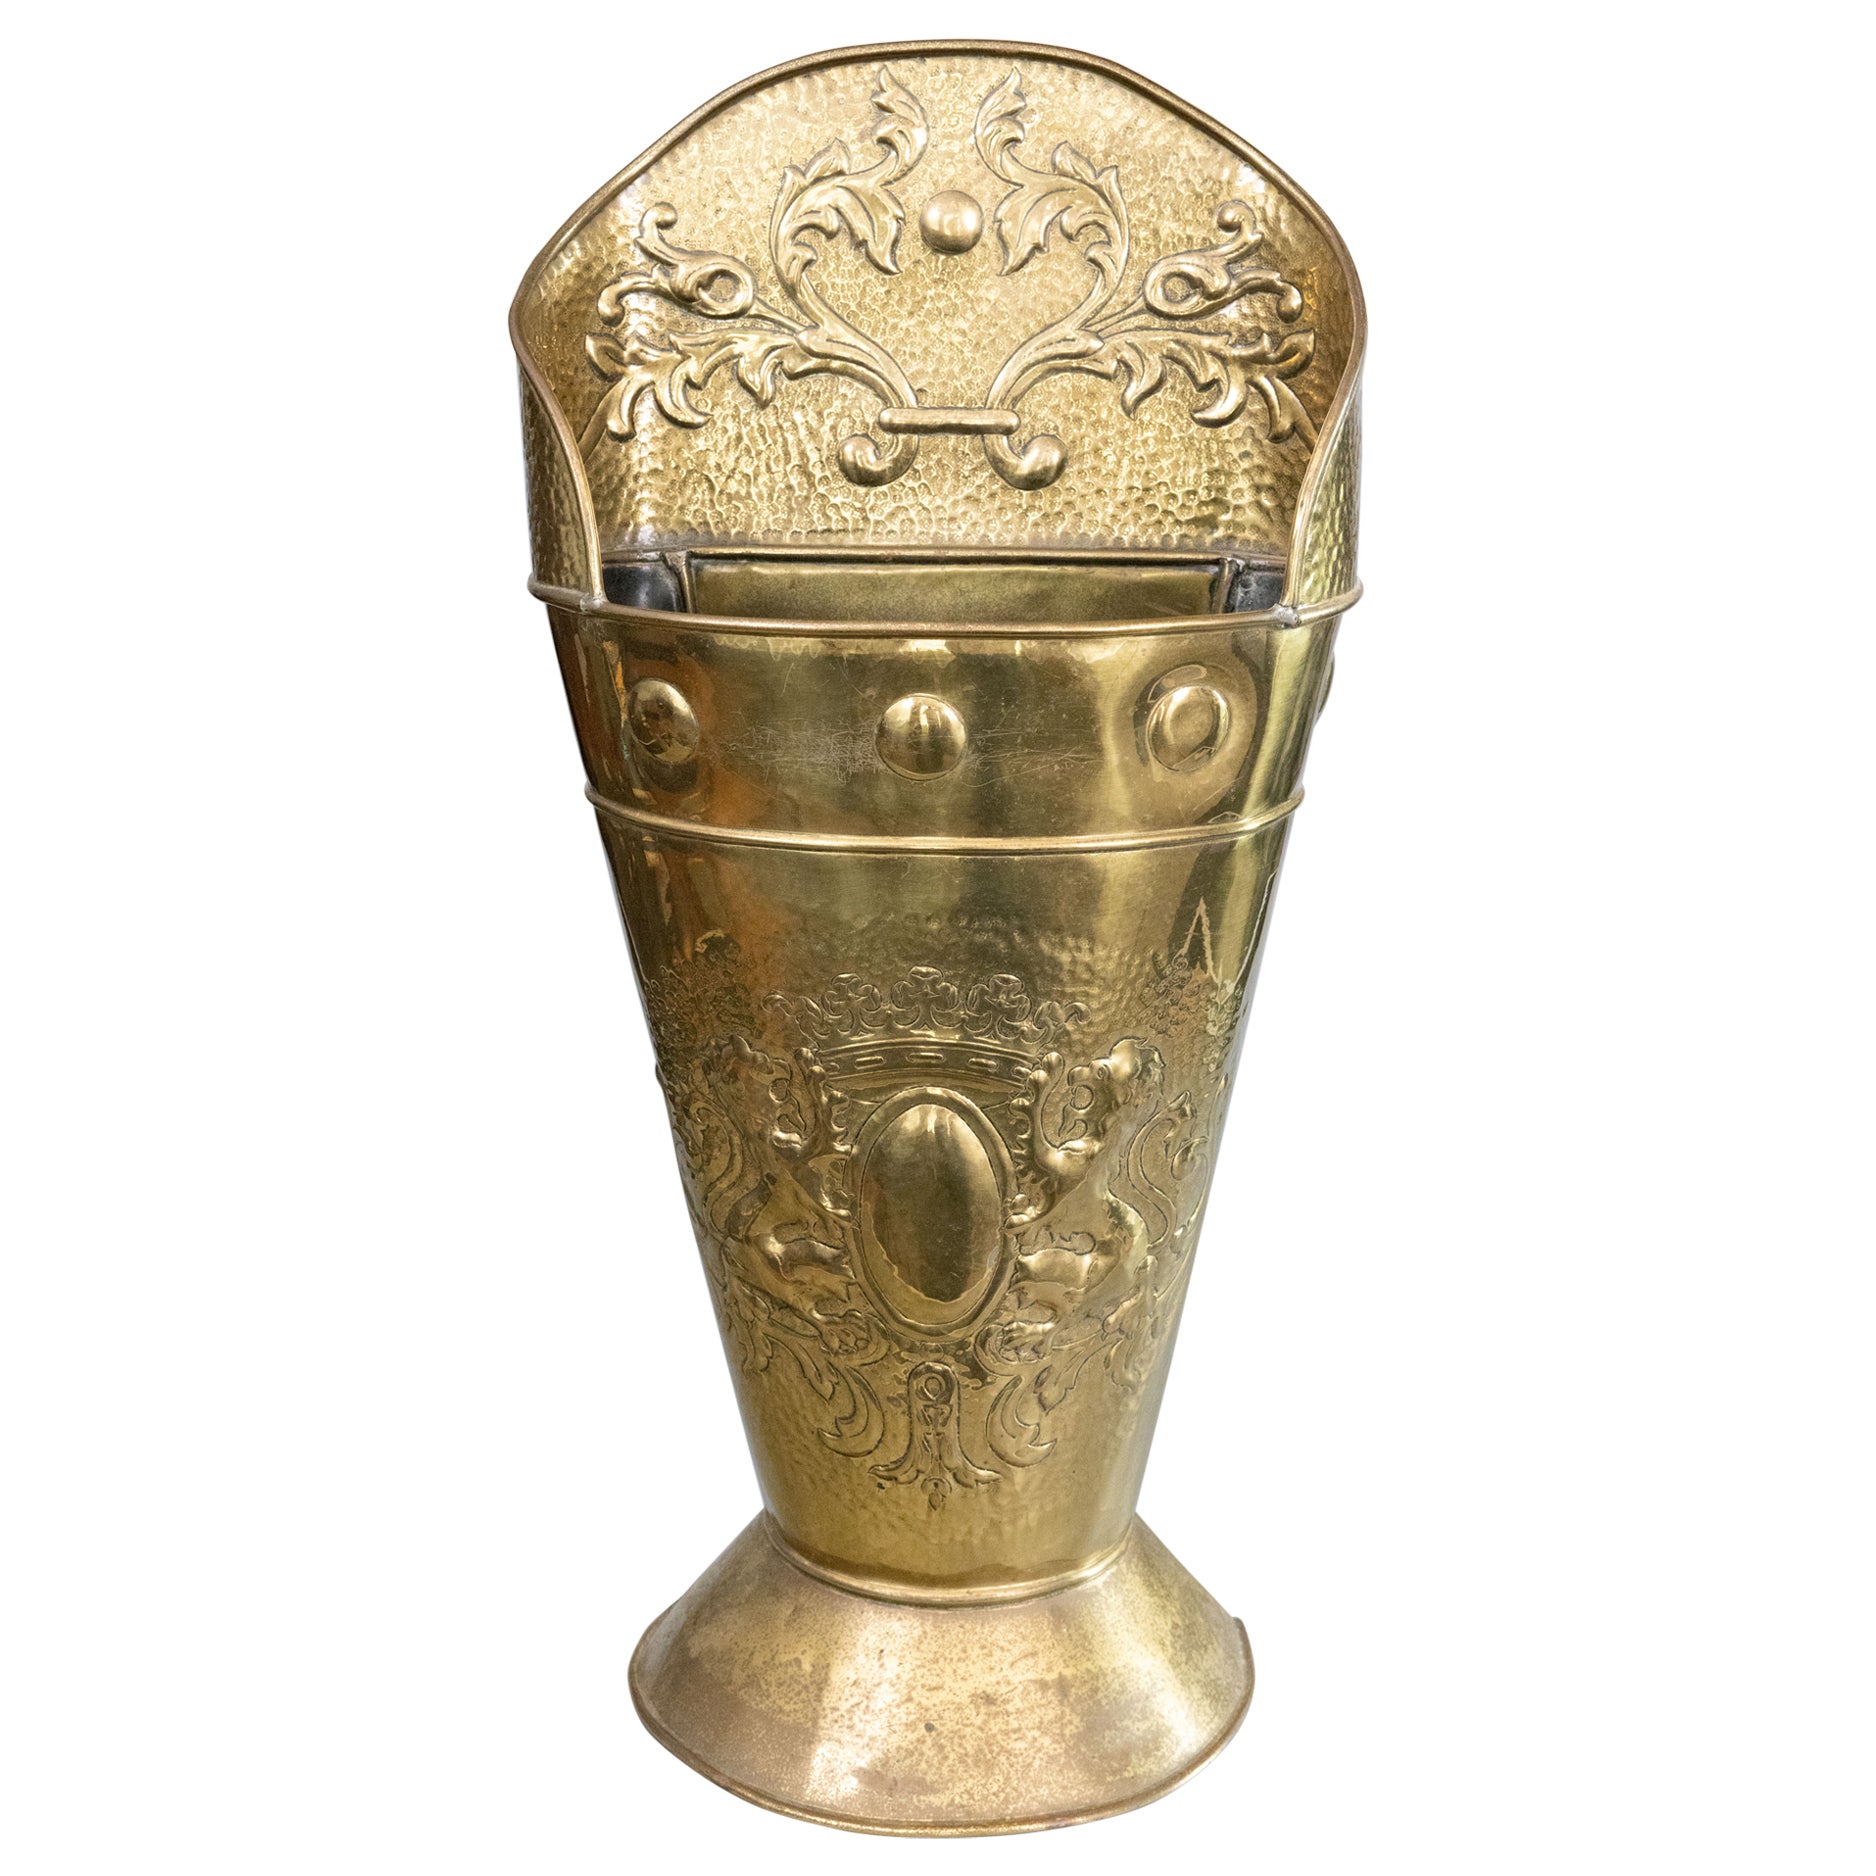 19th Century French Heraldic Hammered Brass Repoussé Grape Hod Umbrella Stand For Sale